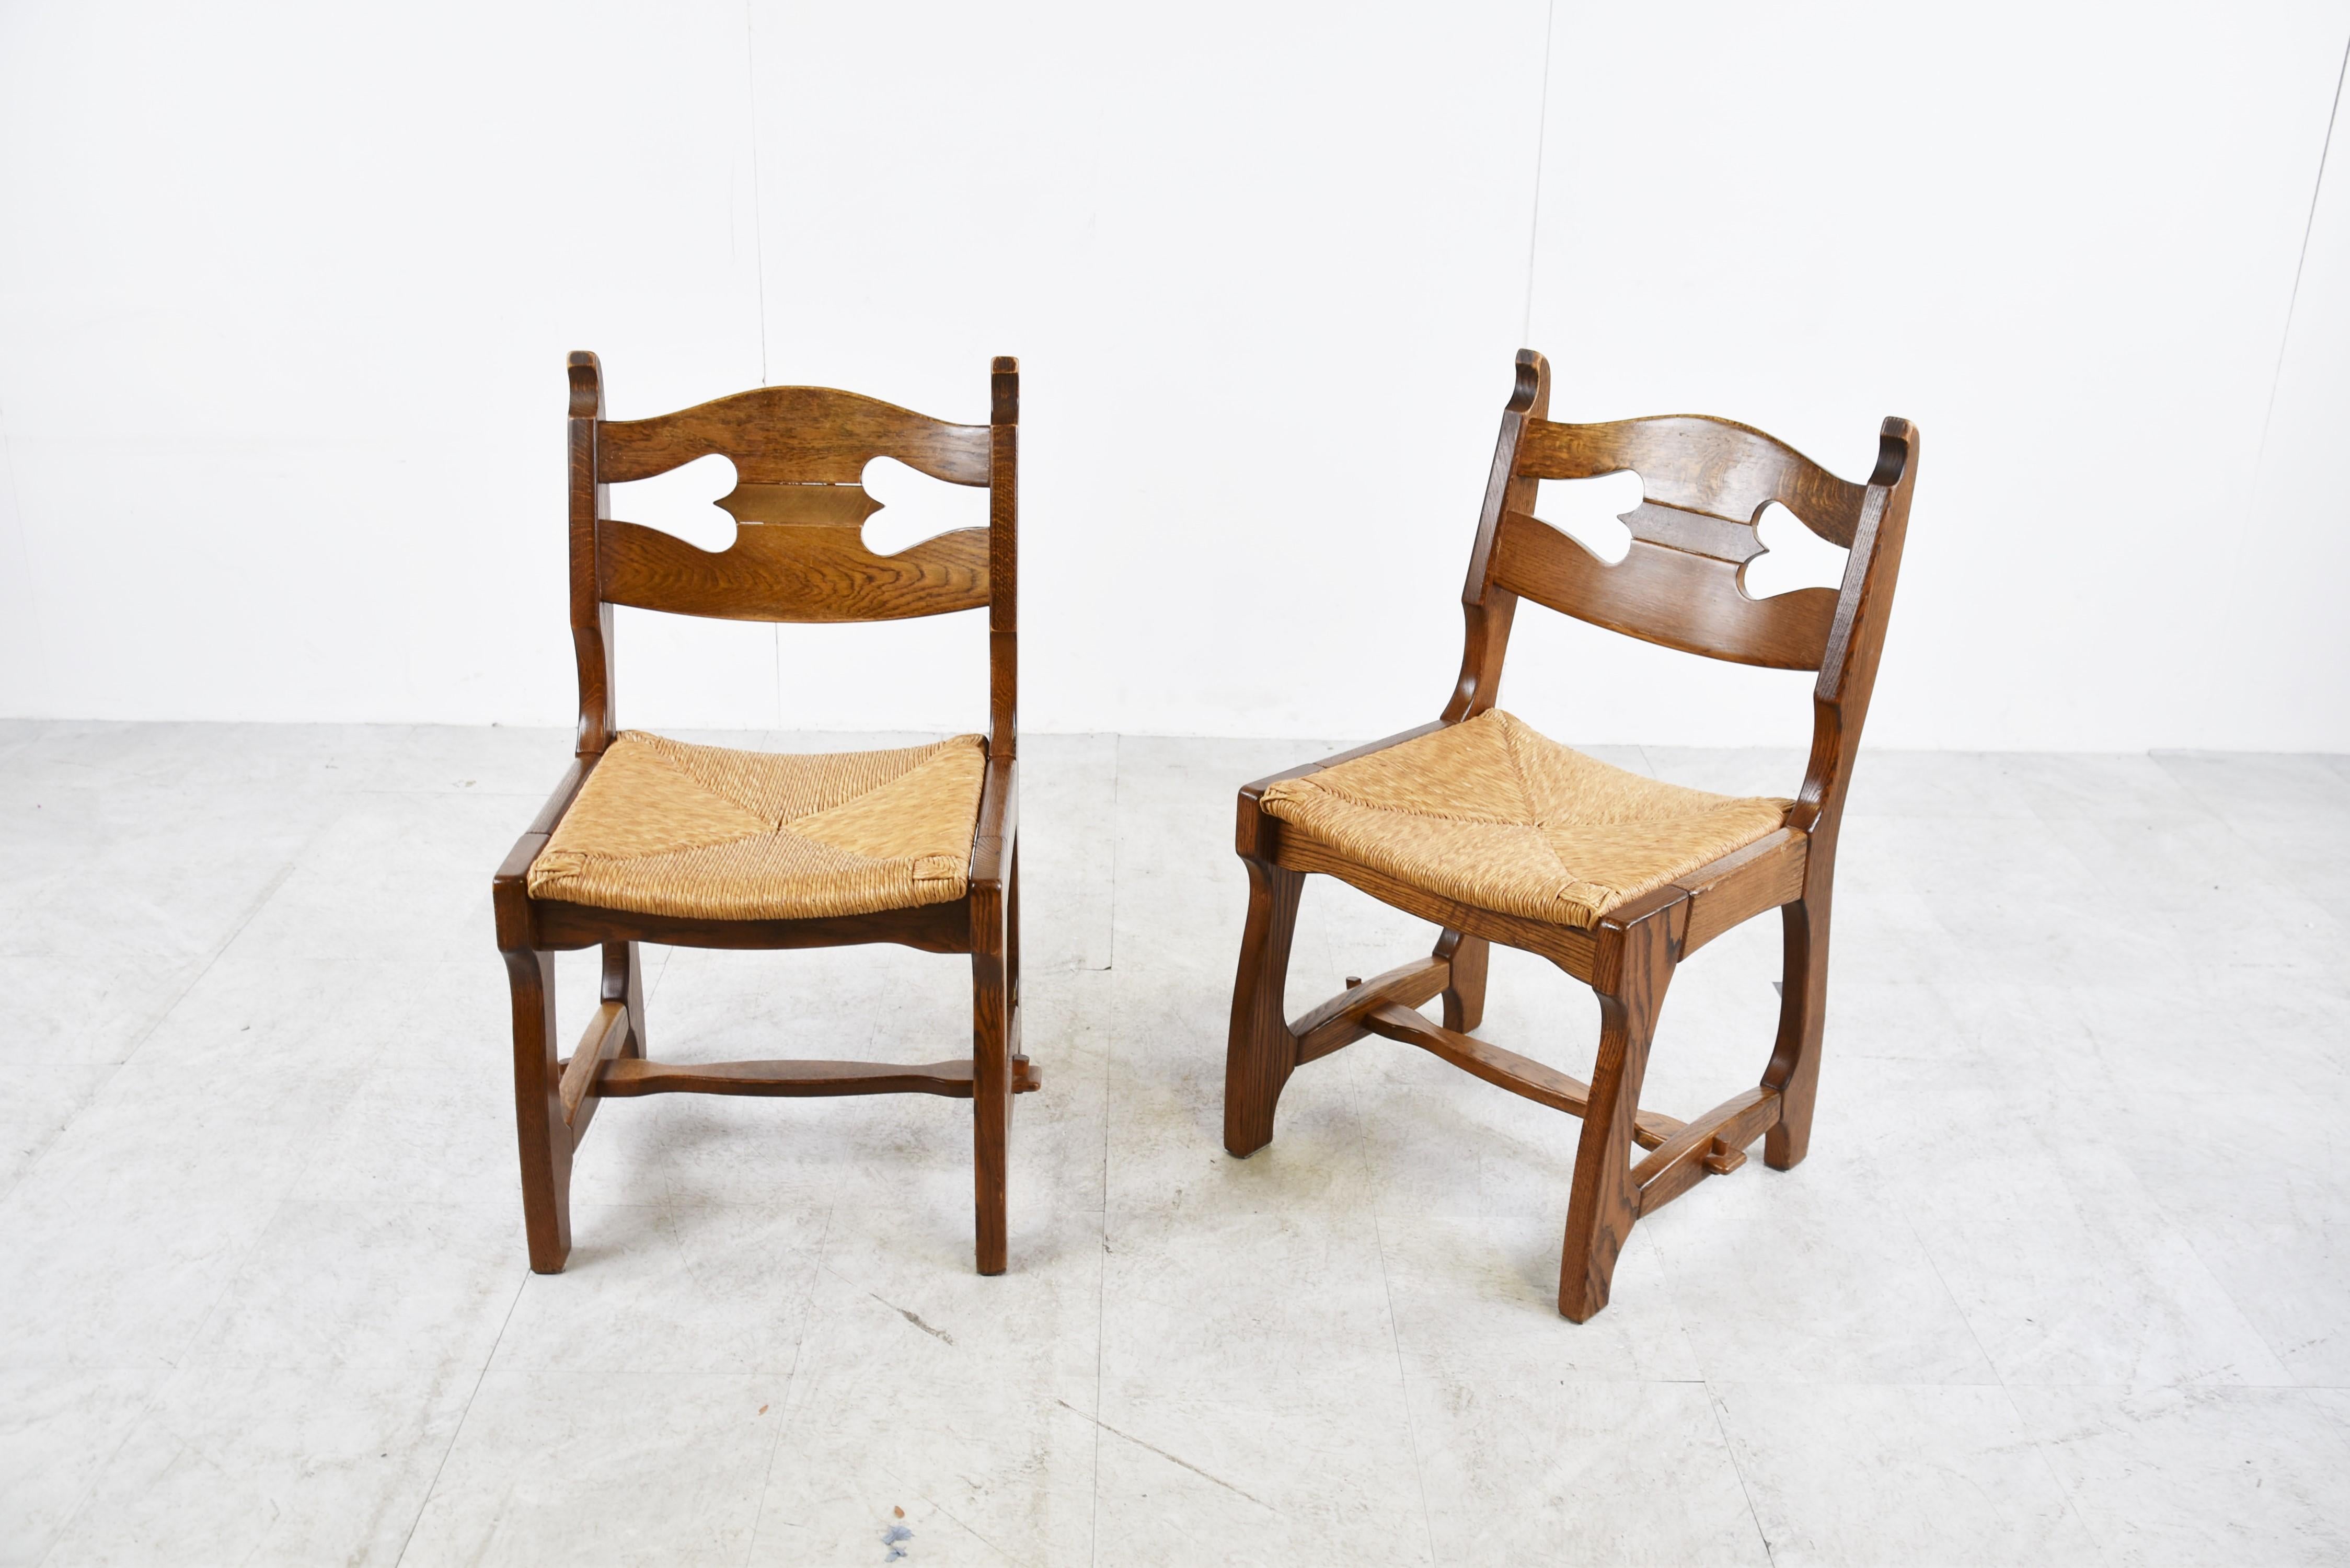 Vintage Oak and Wicker Brutalist Dining Chairs, 1960s For Sale 3